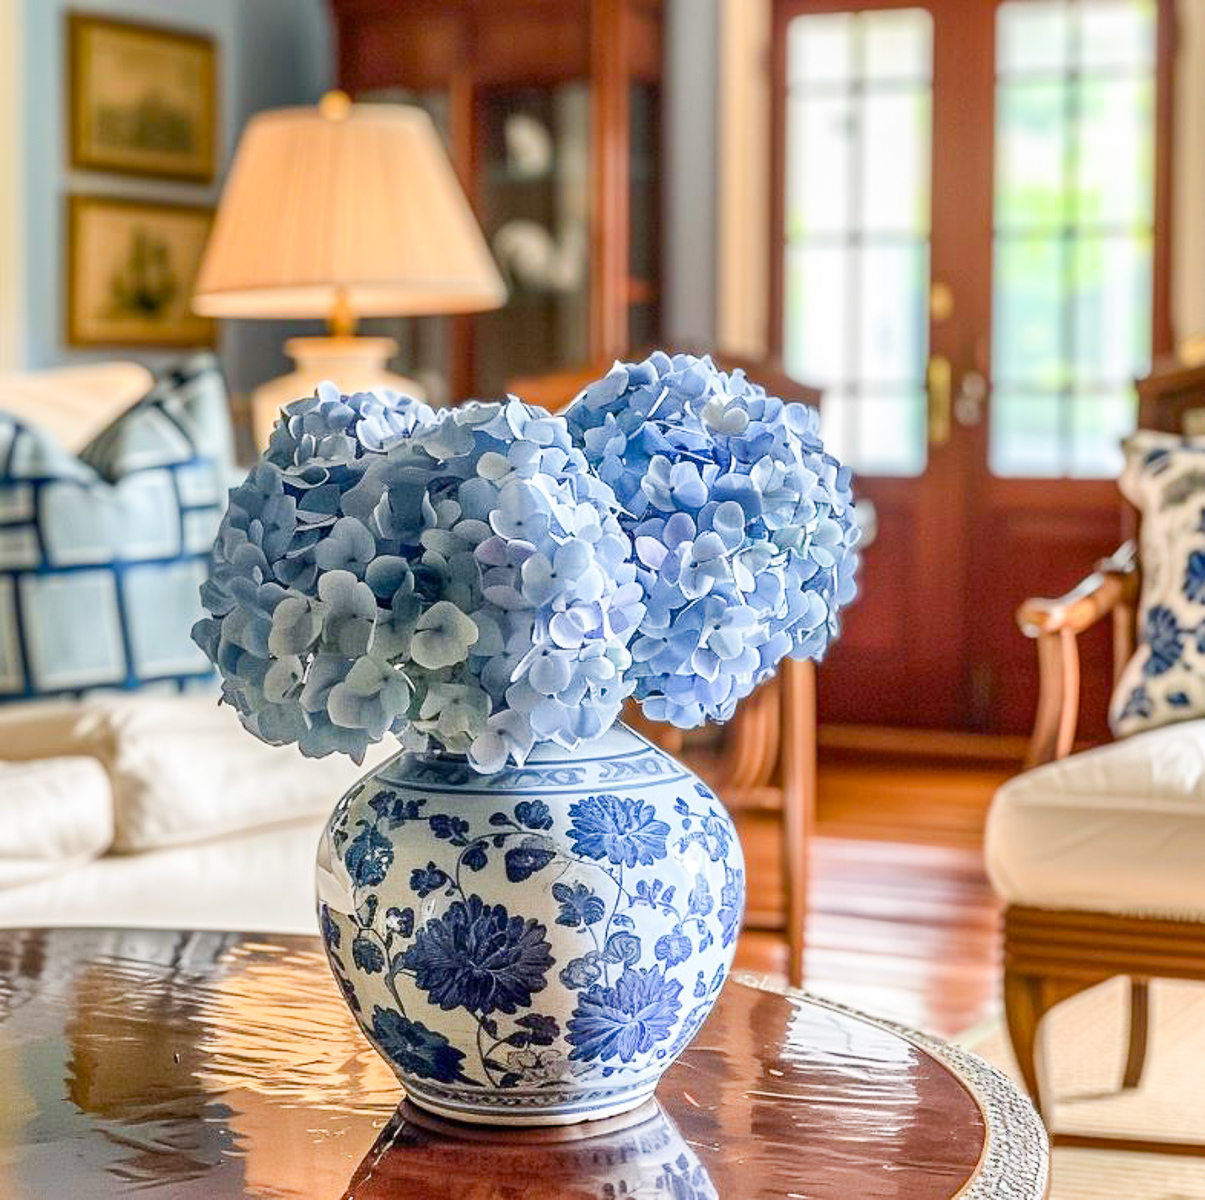 Beyond Bouquets: Decorating With Hydrangeas